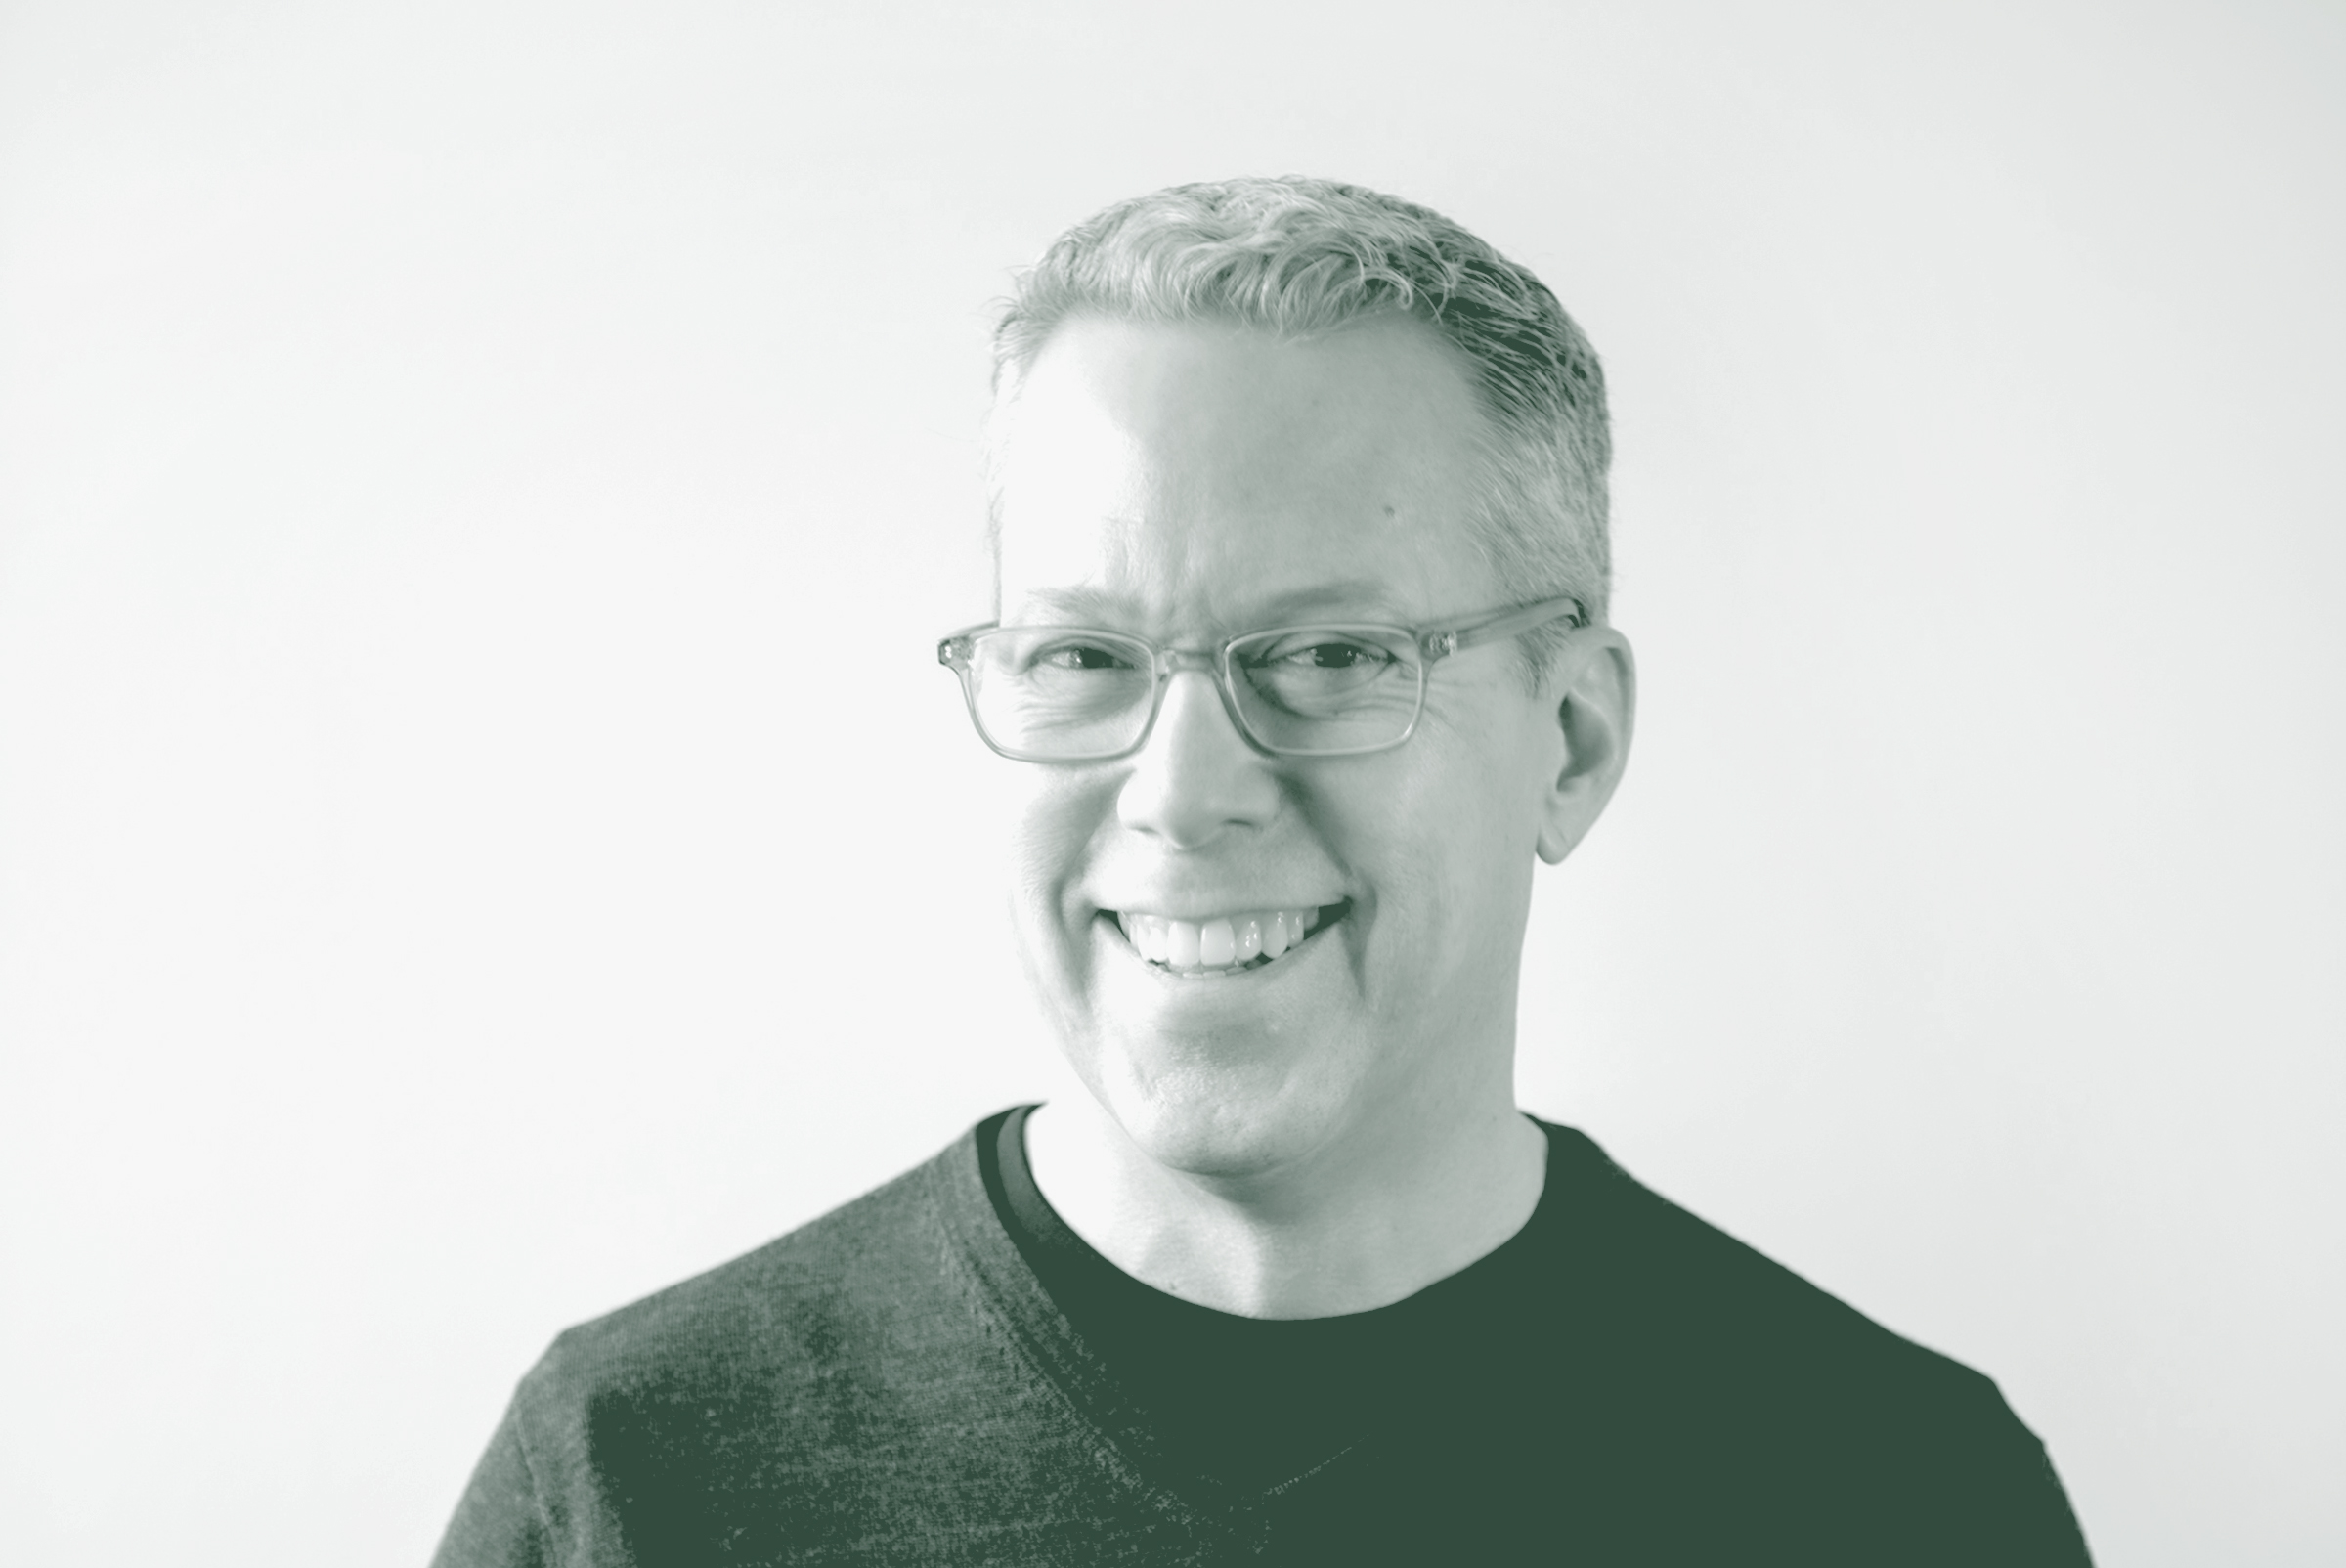 A black and white portrait of Russell Hagg, an Associate Principal and Senior Interior Design Leader with GFF in the Interior Design Studio, in front of a white background.